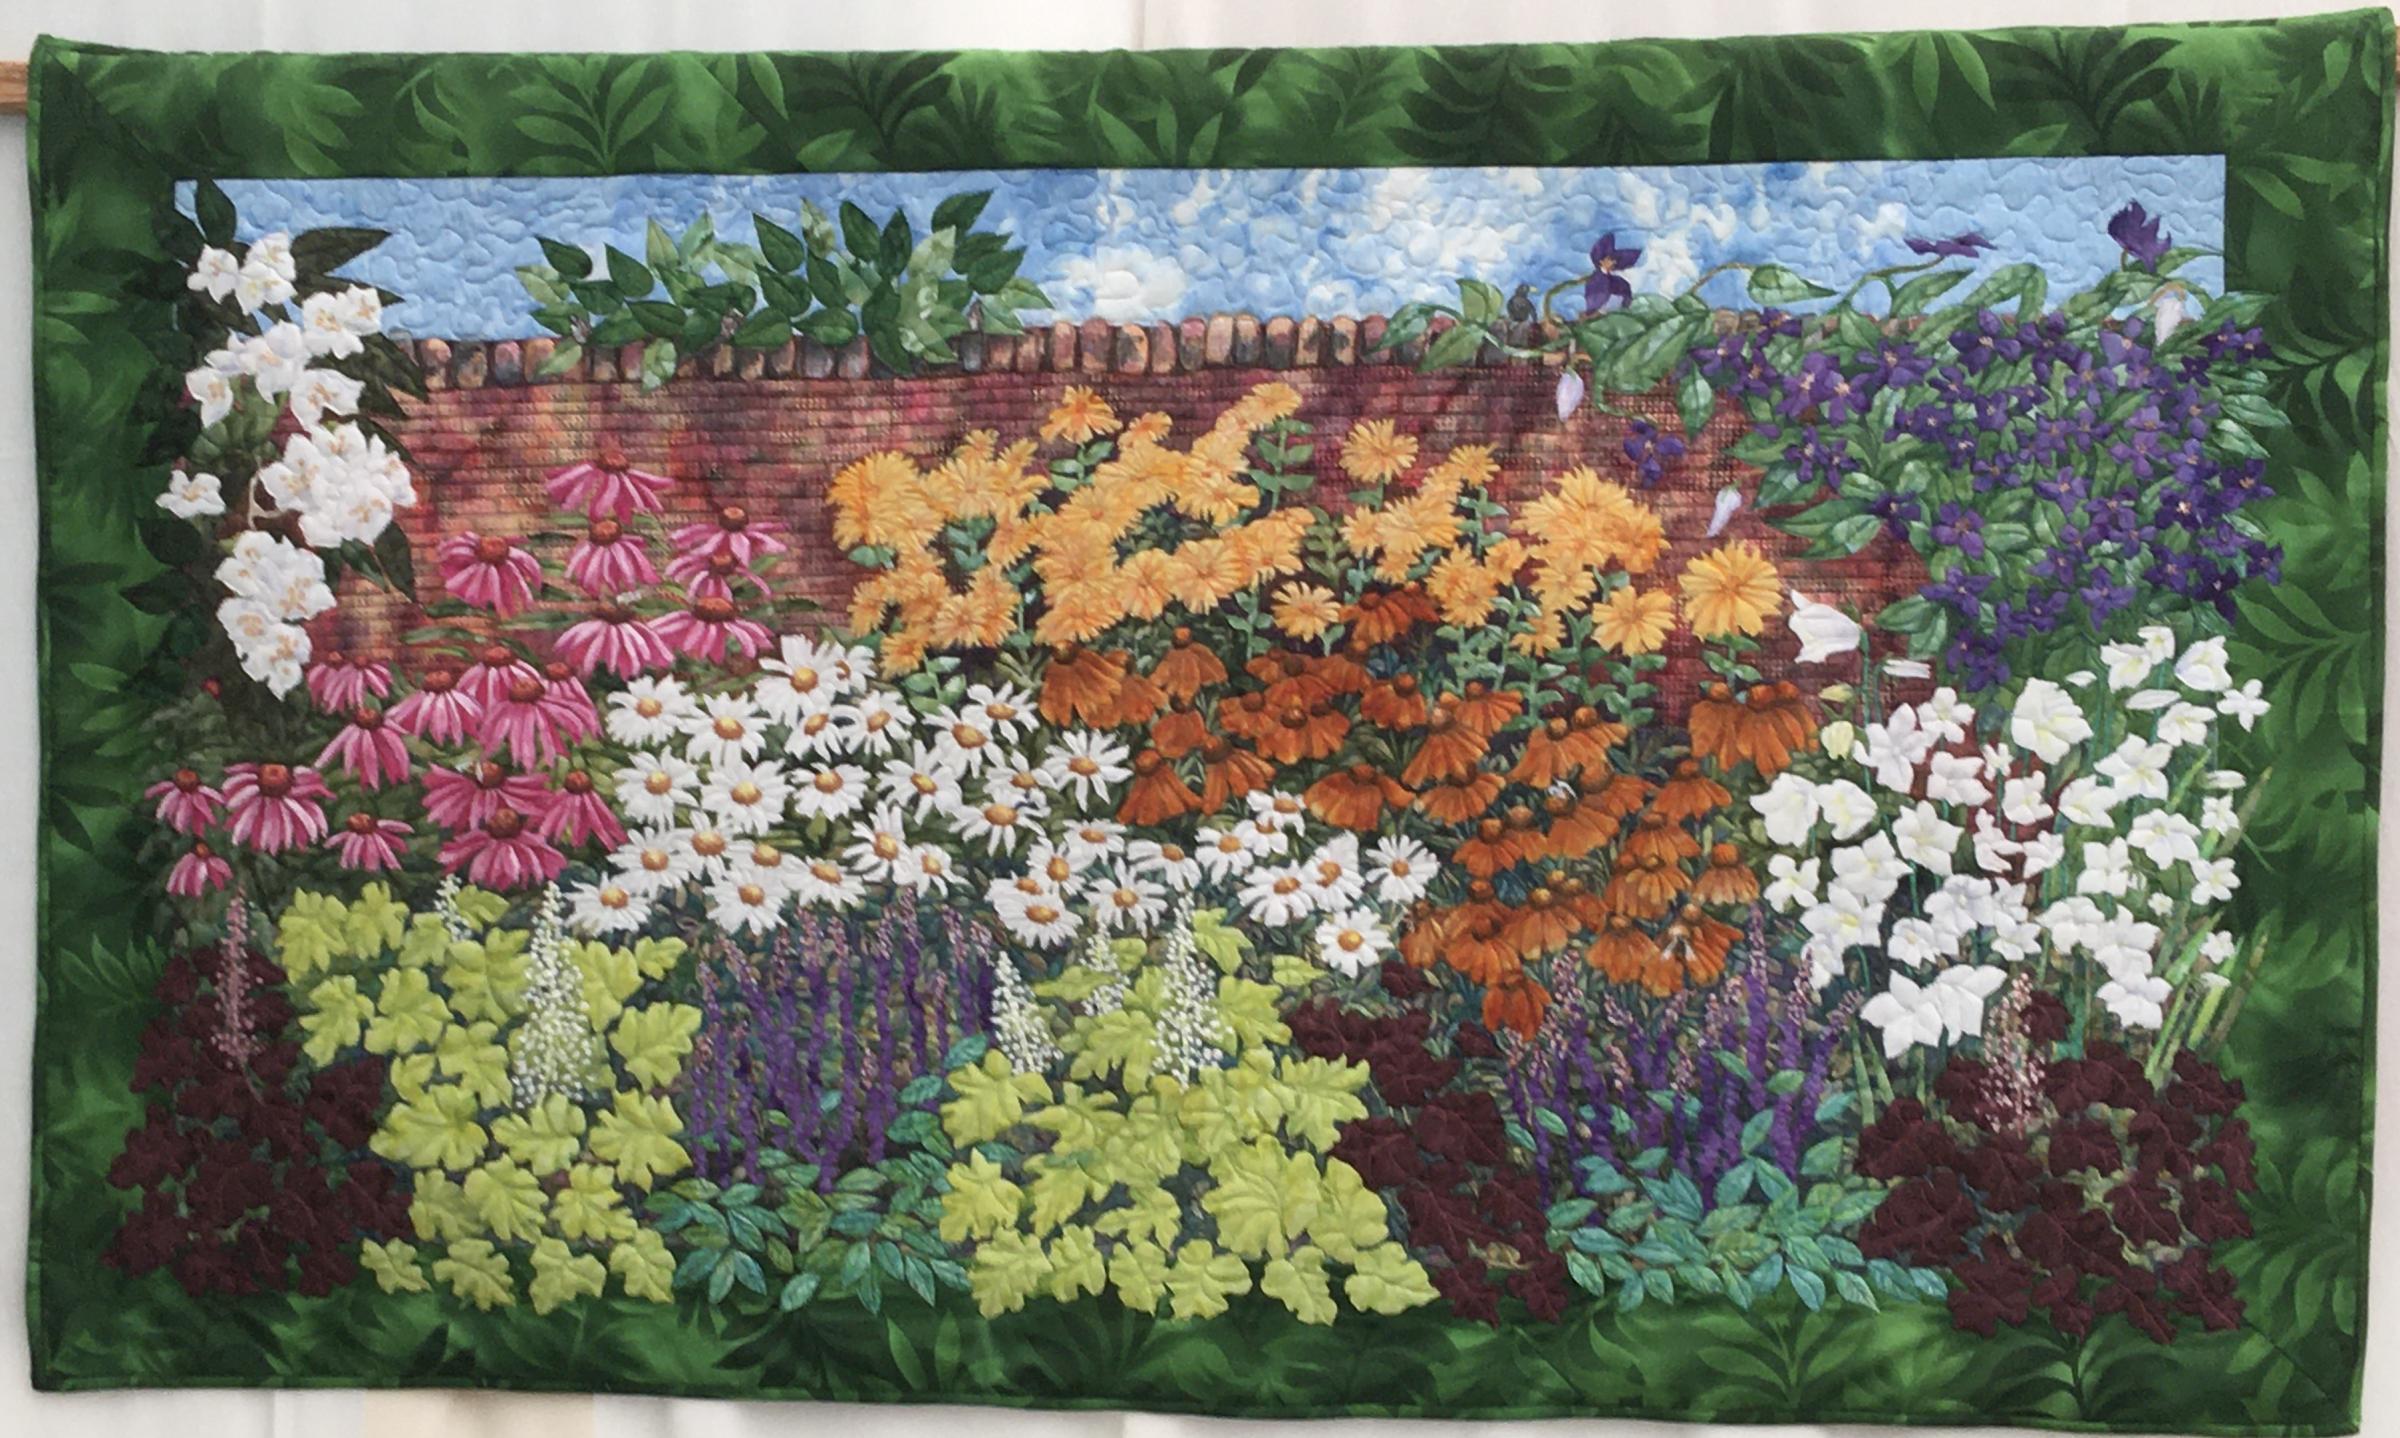 Themed Quilt Prize (3rd Place): Flower Border by Claire Tinsley